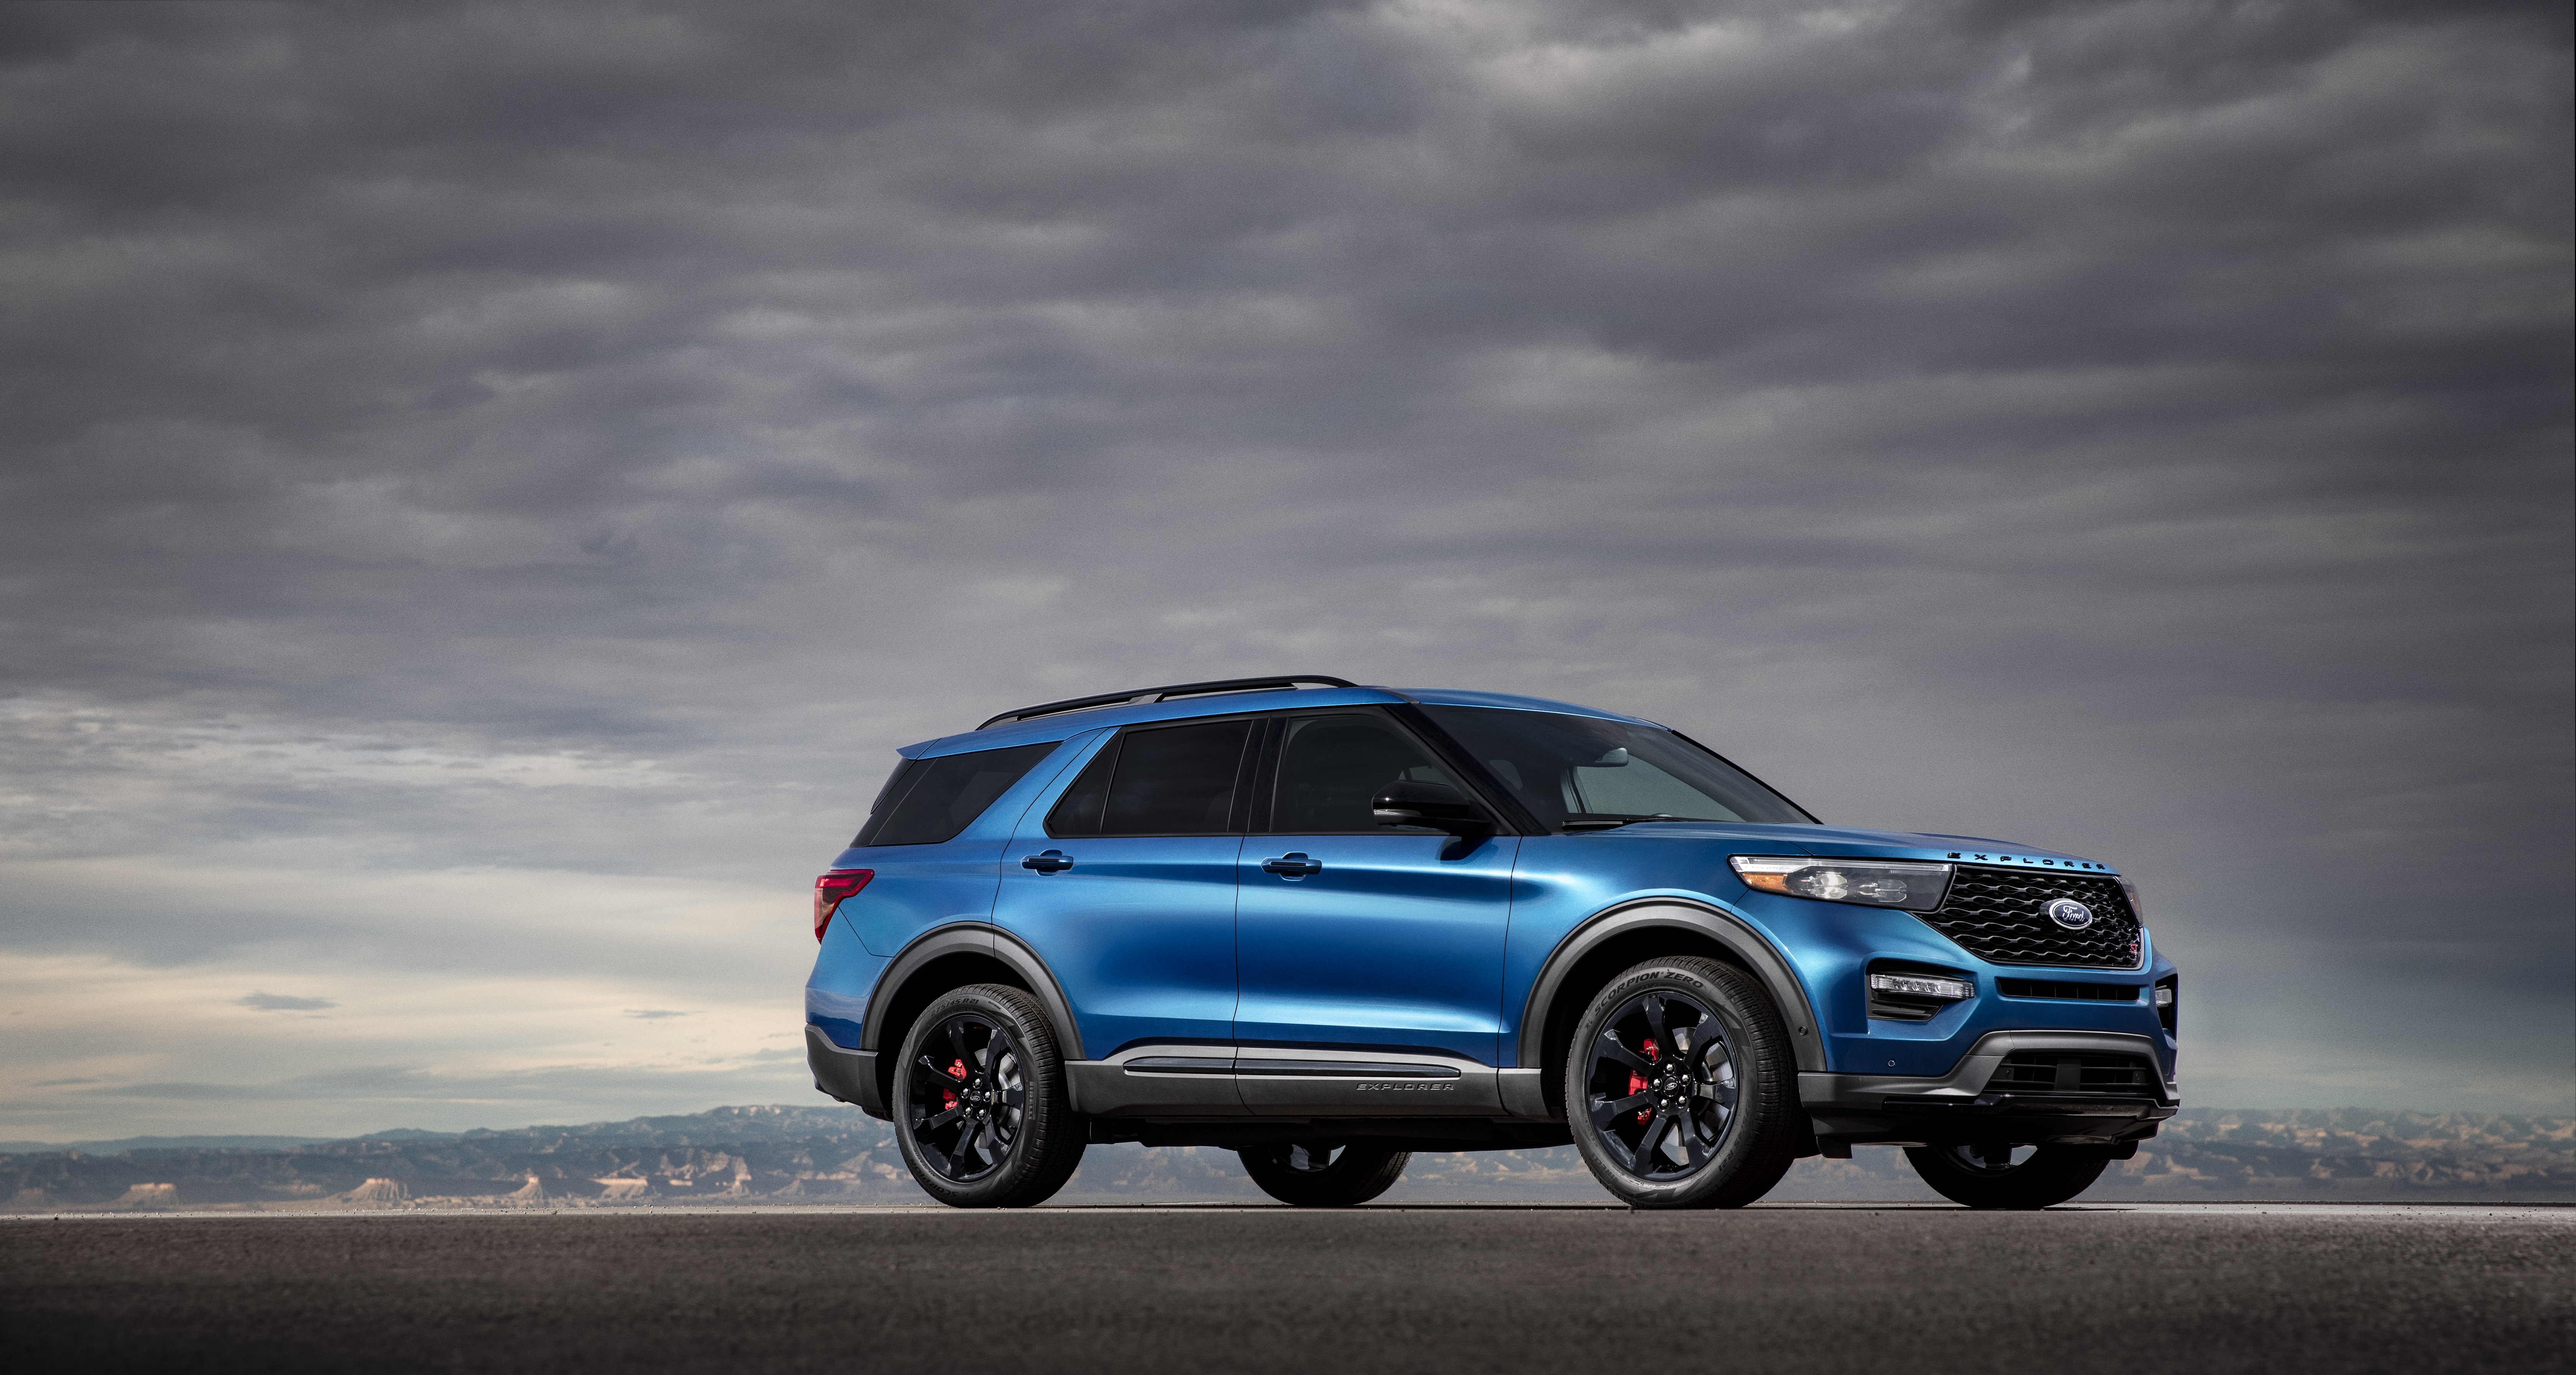 Ford Explorer exterior restyling